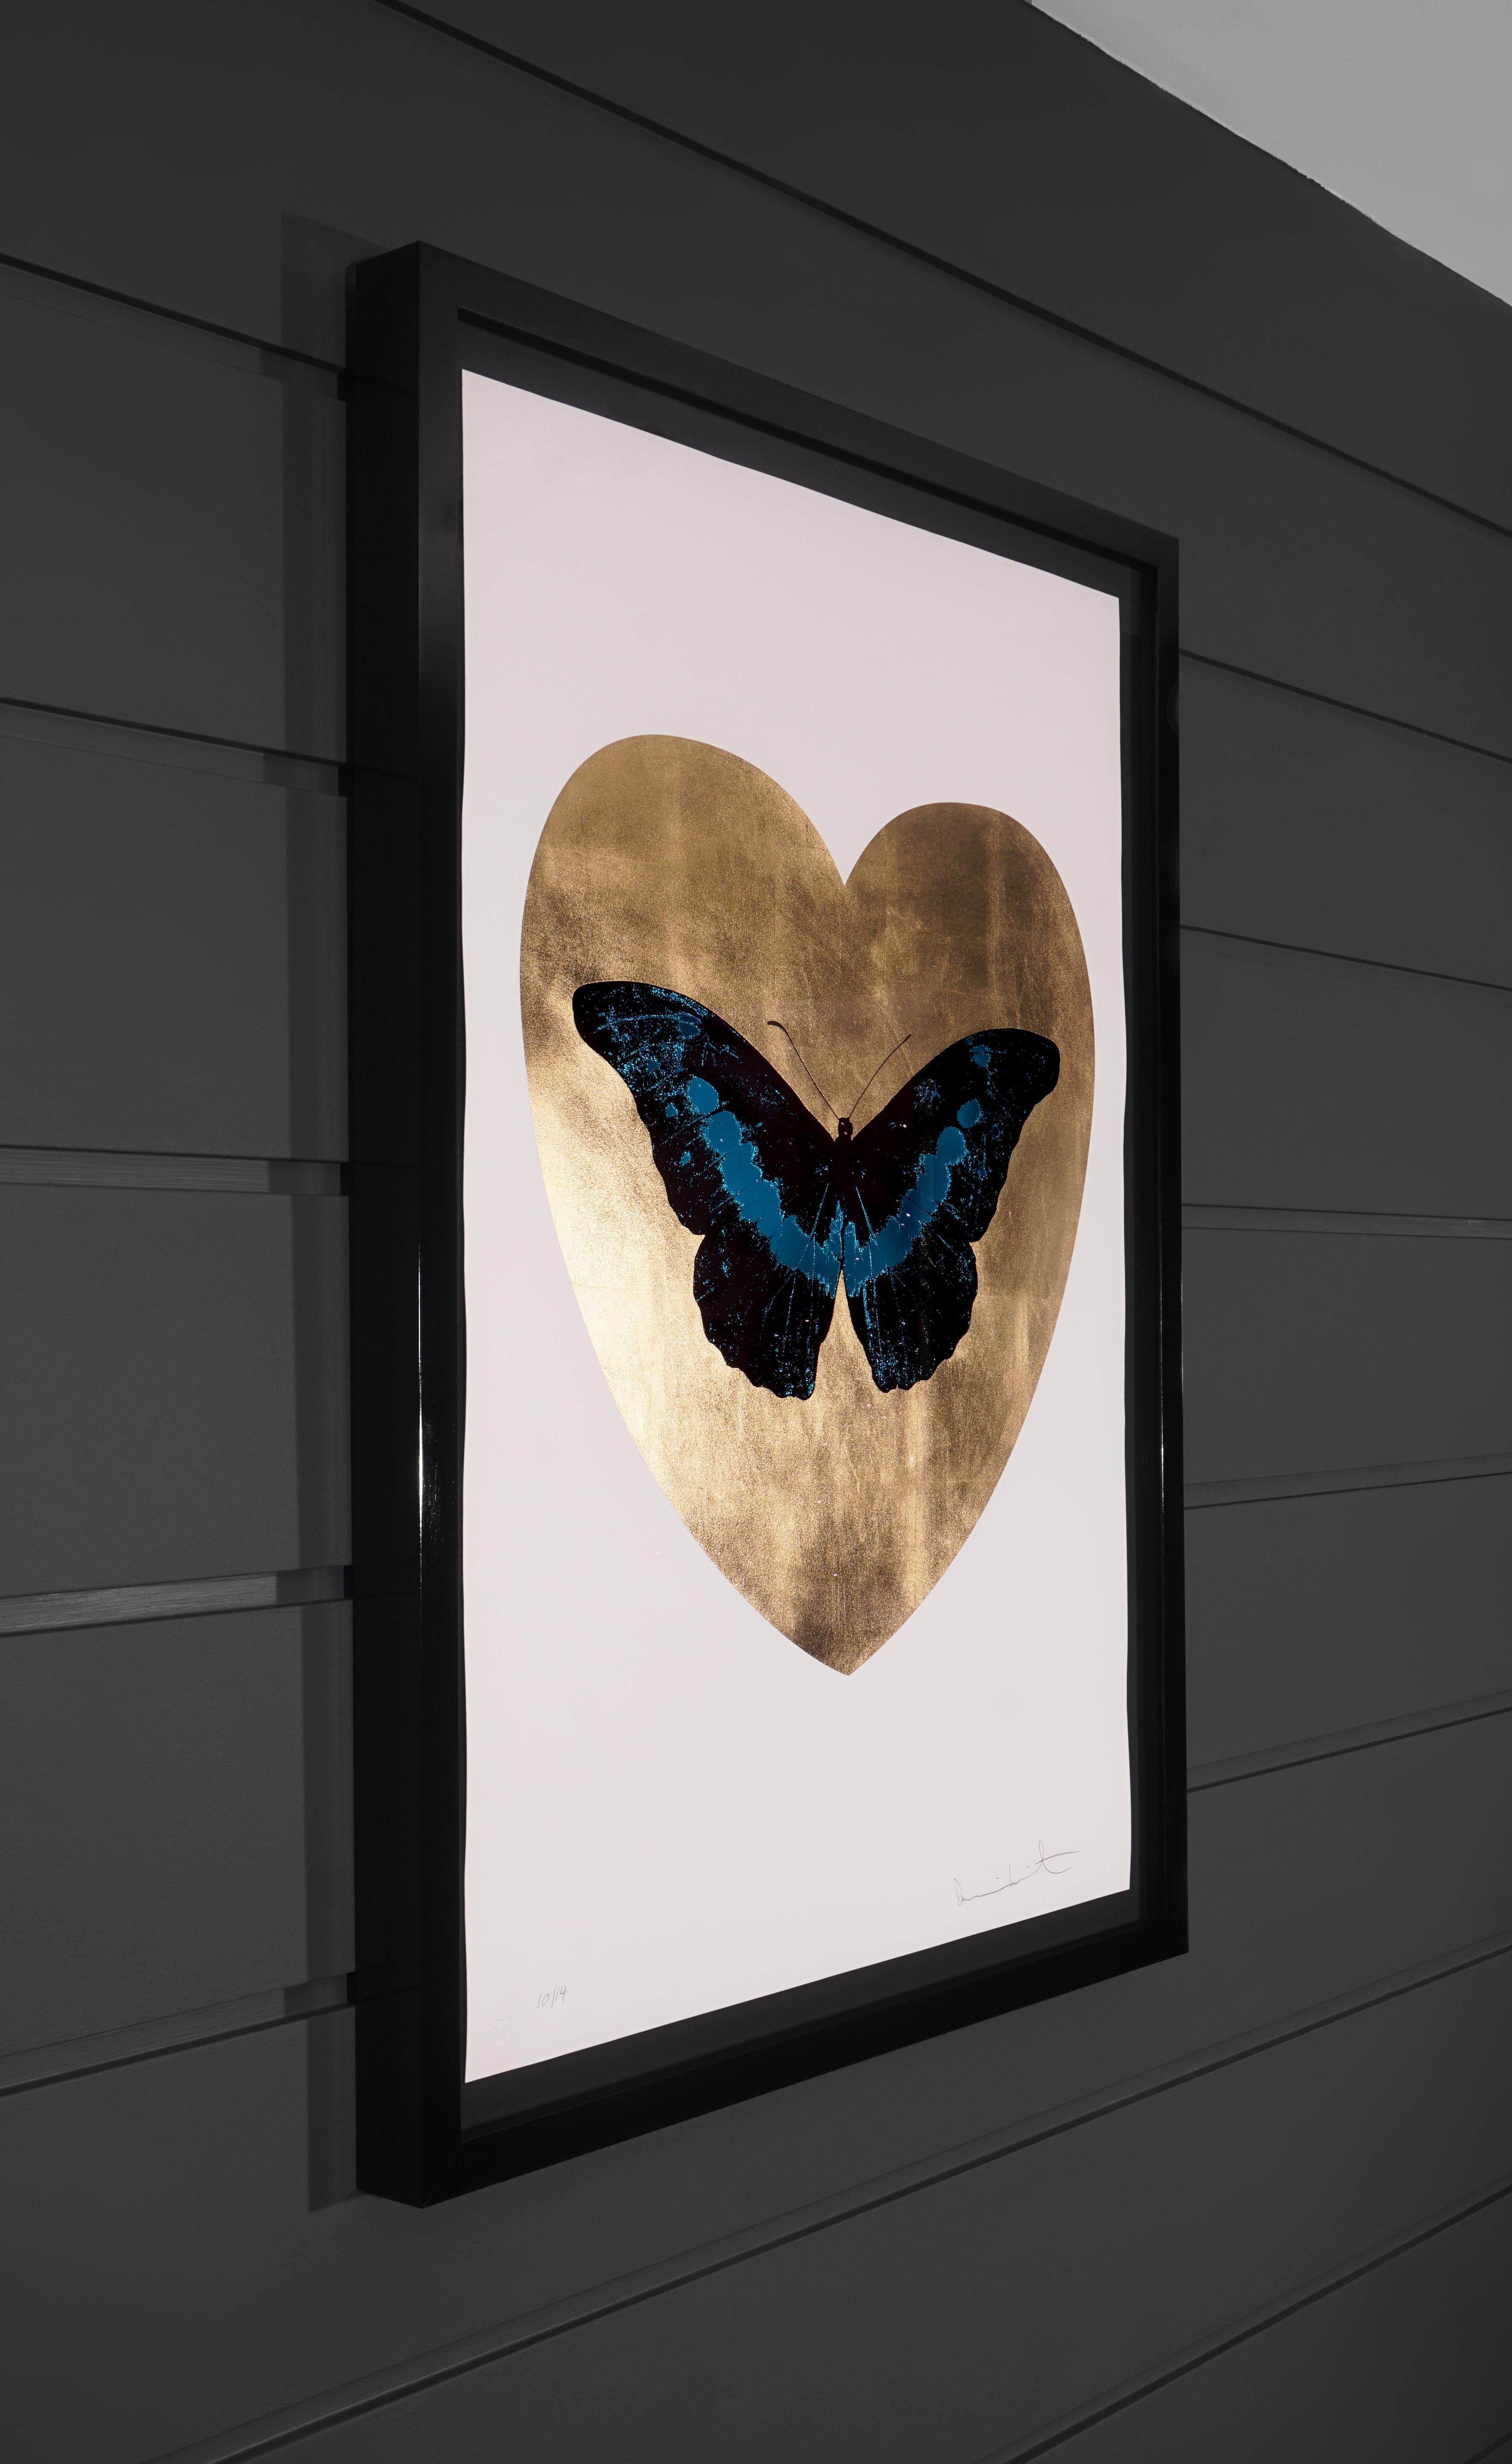 Damien Hirst, 'I Love You' Butterfly, Turquoise/Gold, 2015 1